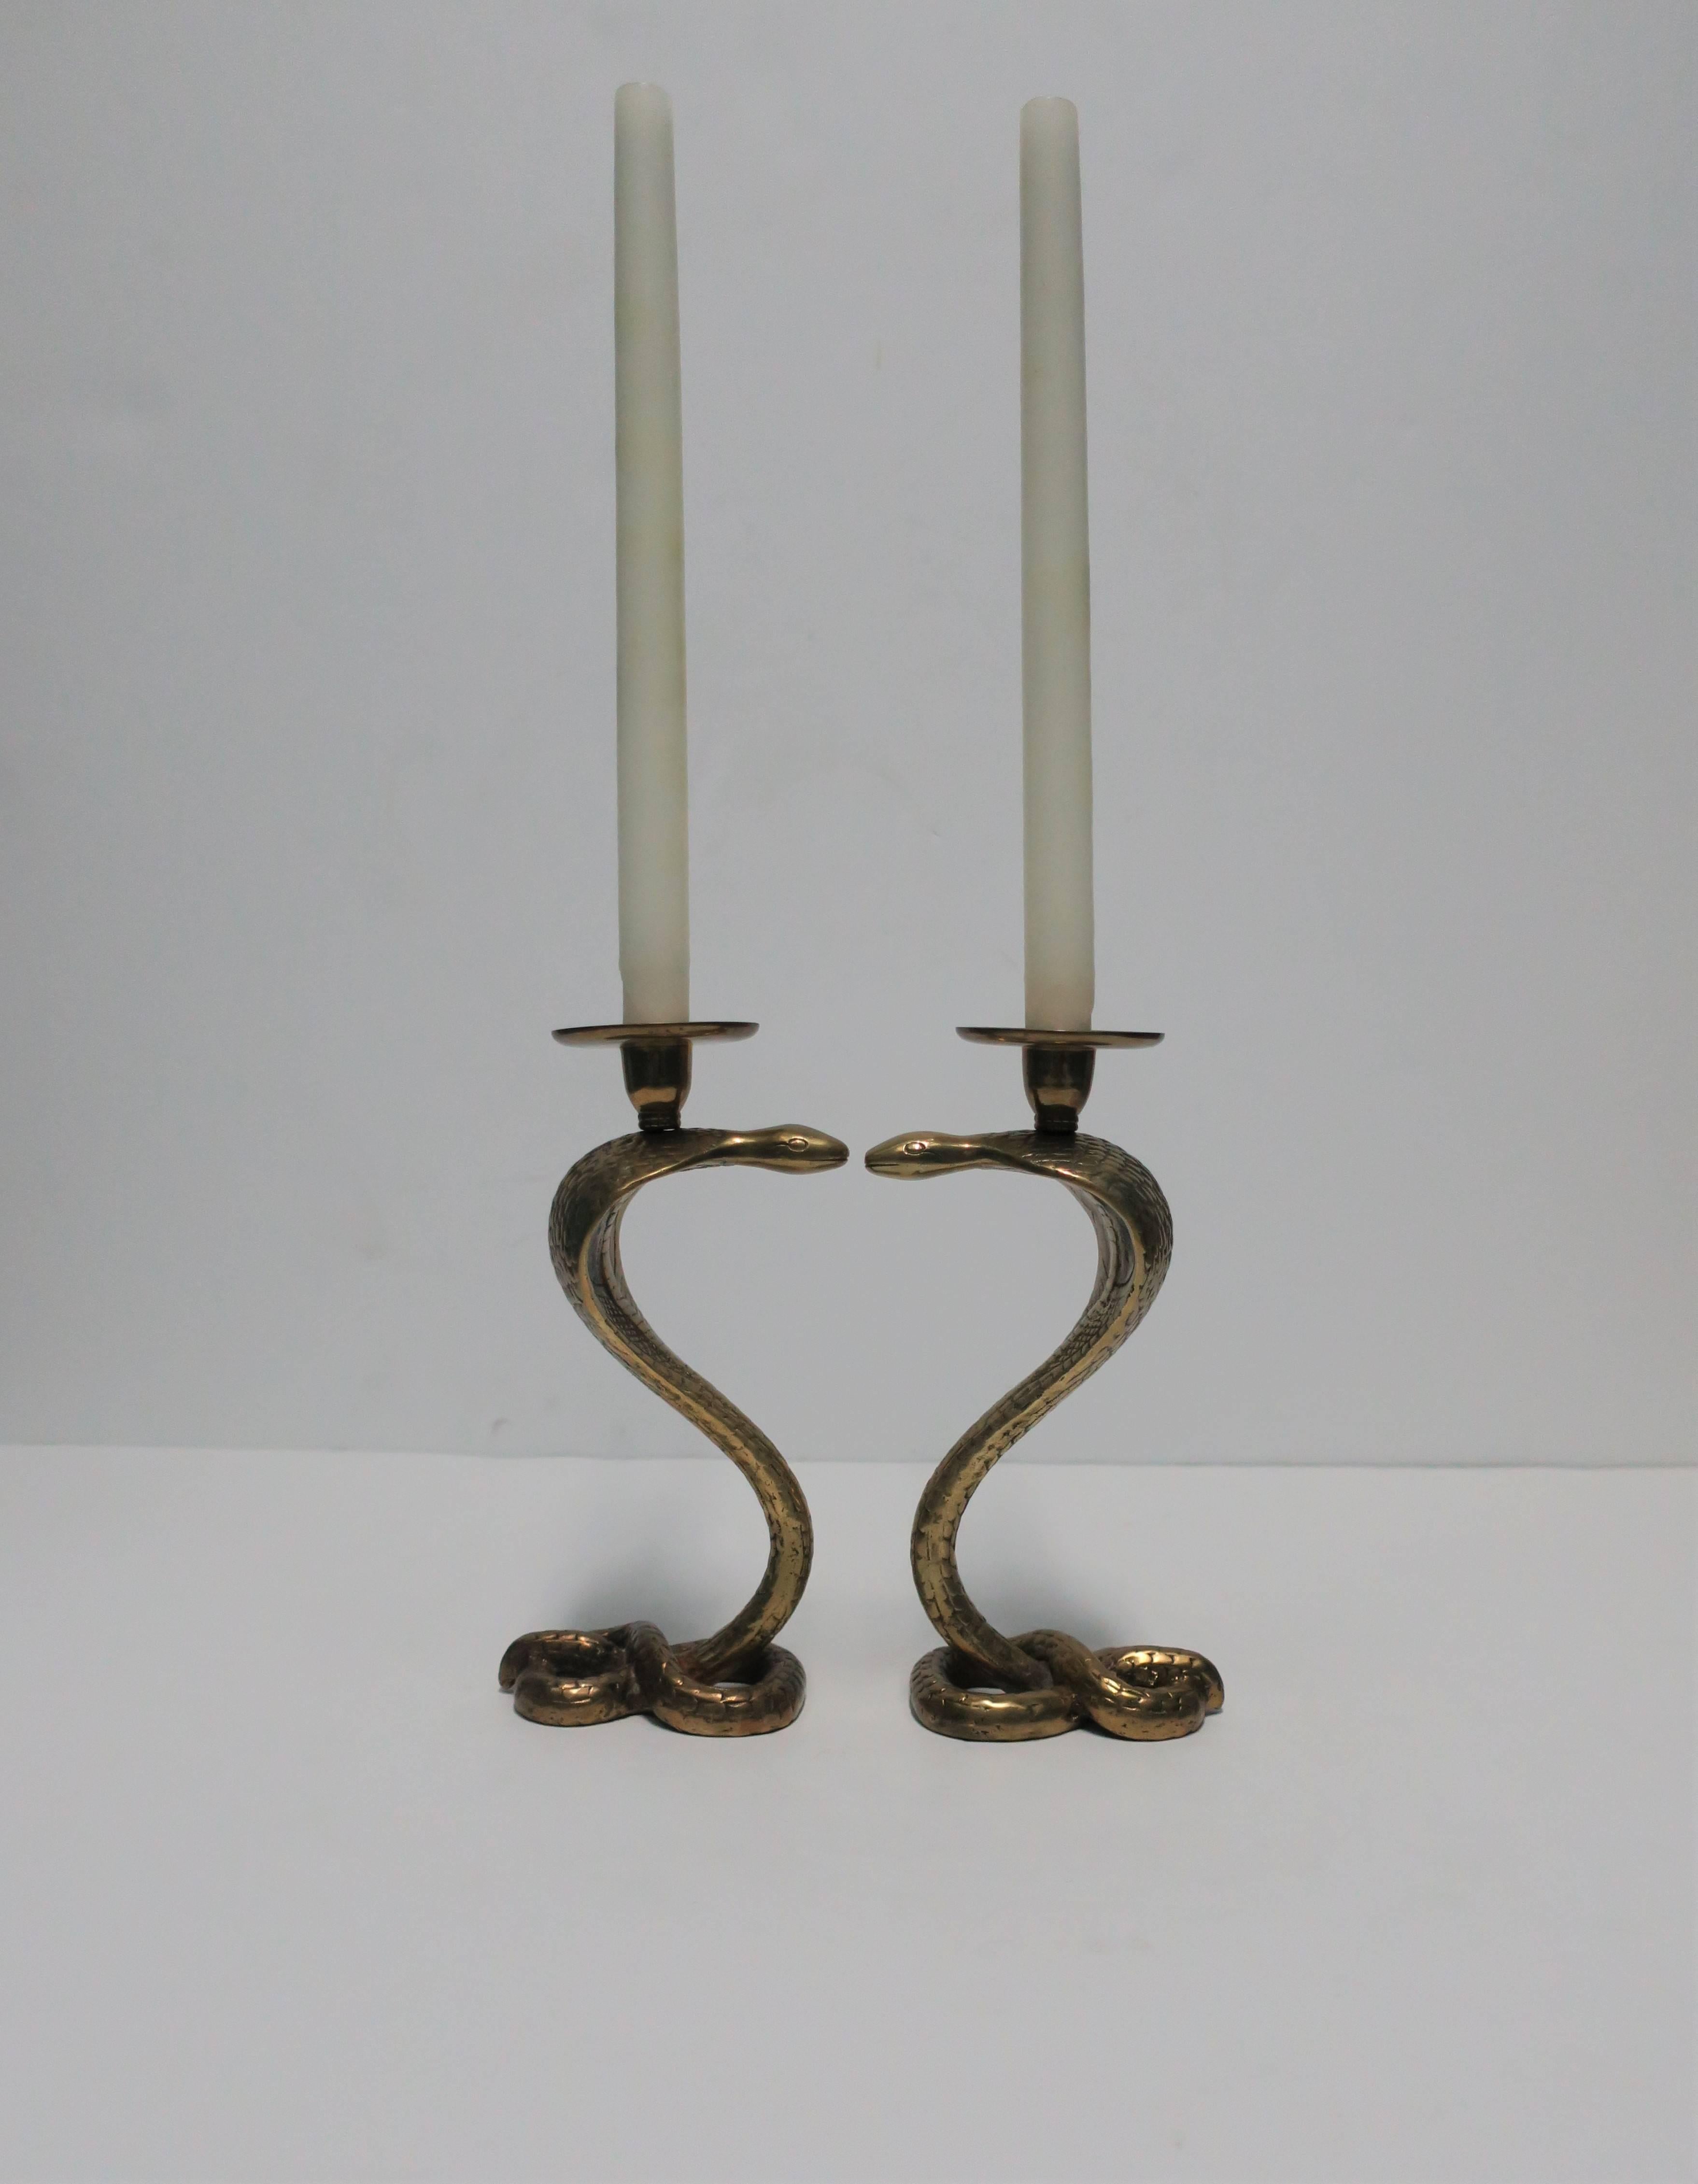 A striking pair of solid brass Cobra snake sculpture candlestick holders. Beautiful details from base to top, with brass resembling snakeskin look and feel.

Each measure: 8.75 in. H x 4 in. x 2.5 in. 

Pair available here online. By request, pair